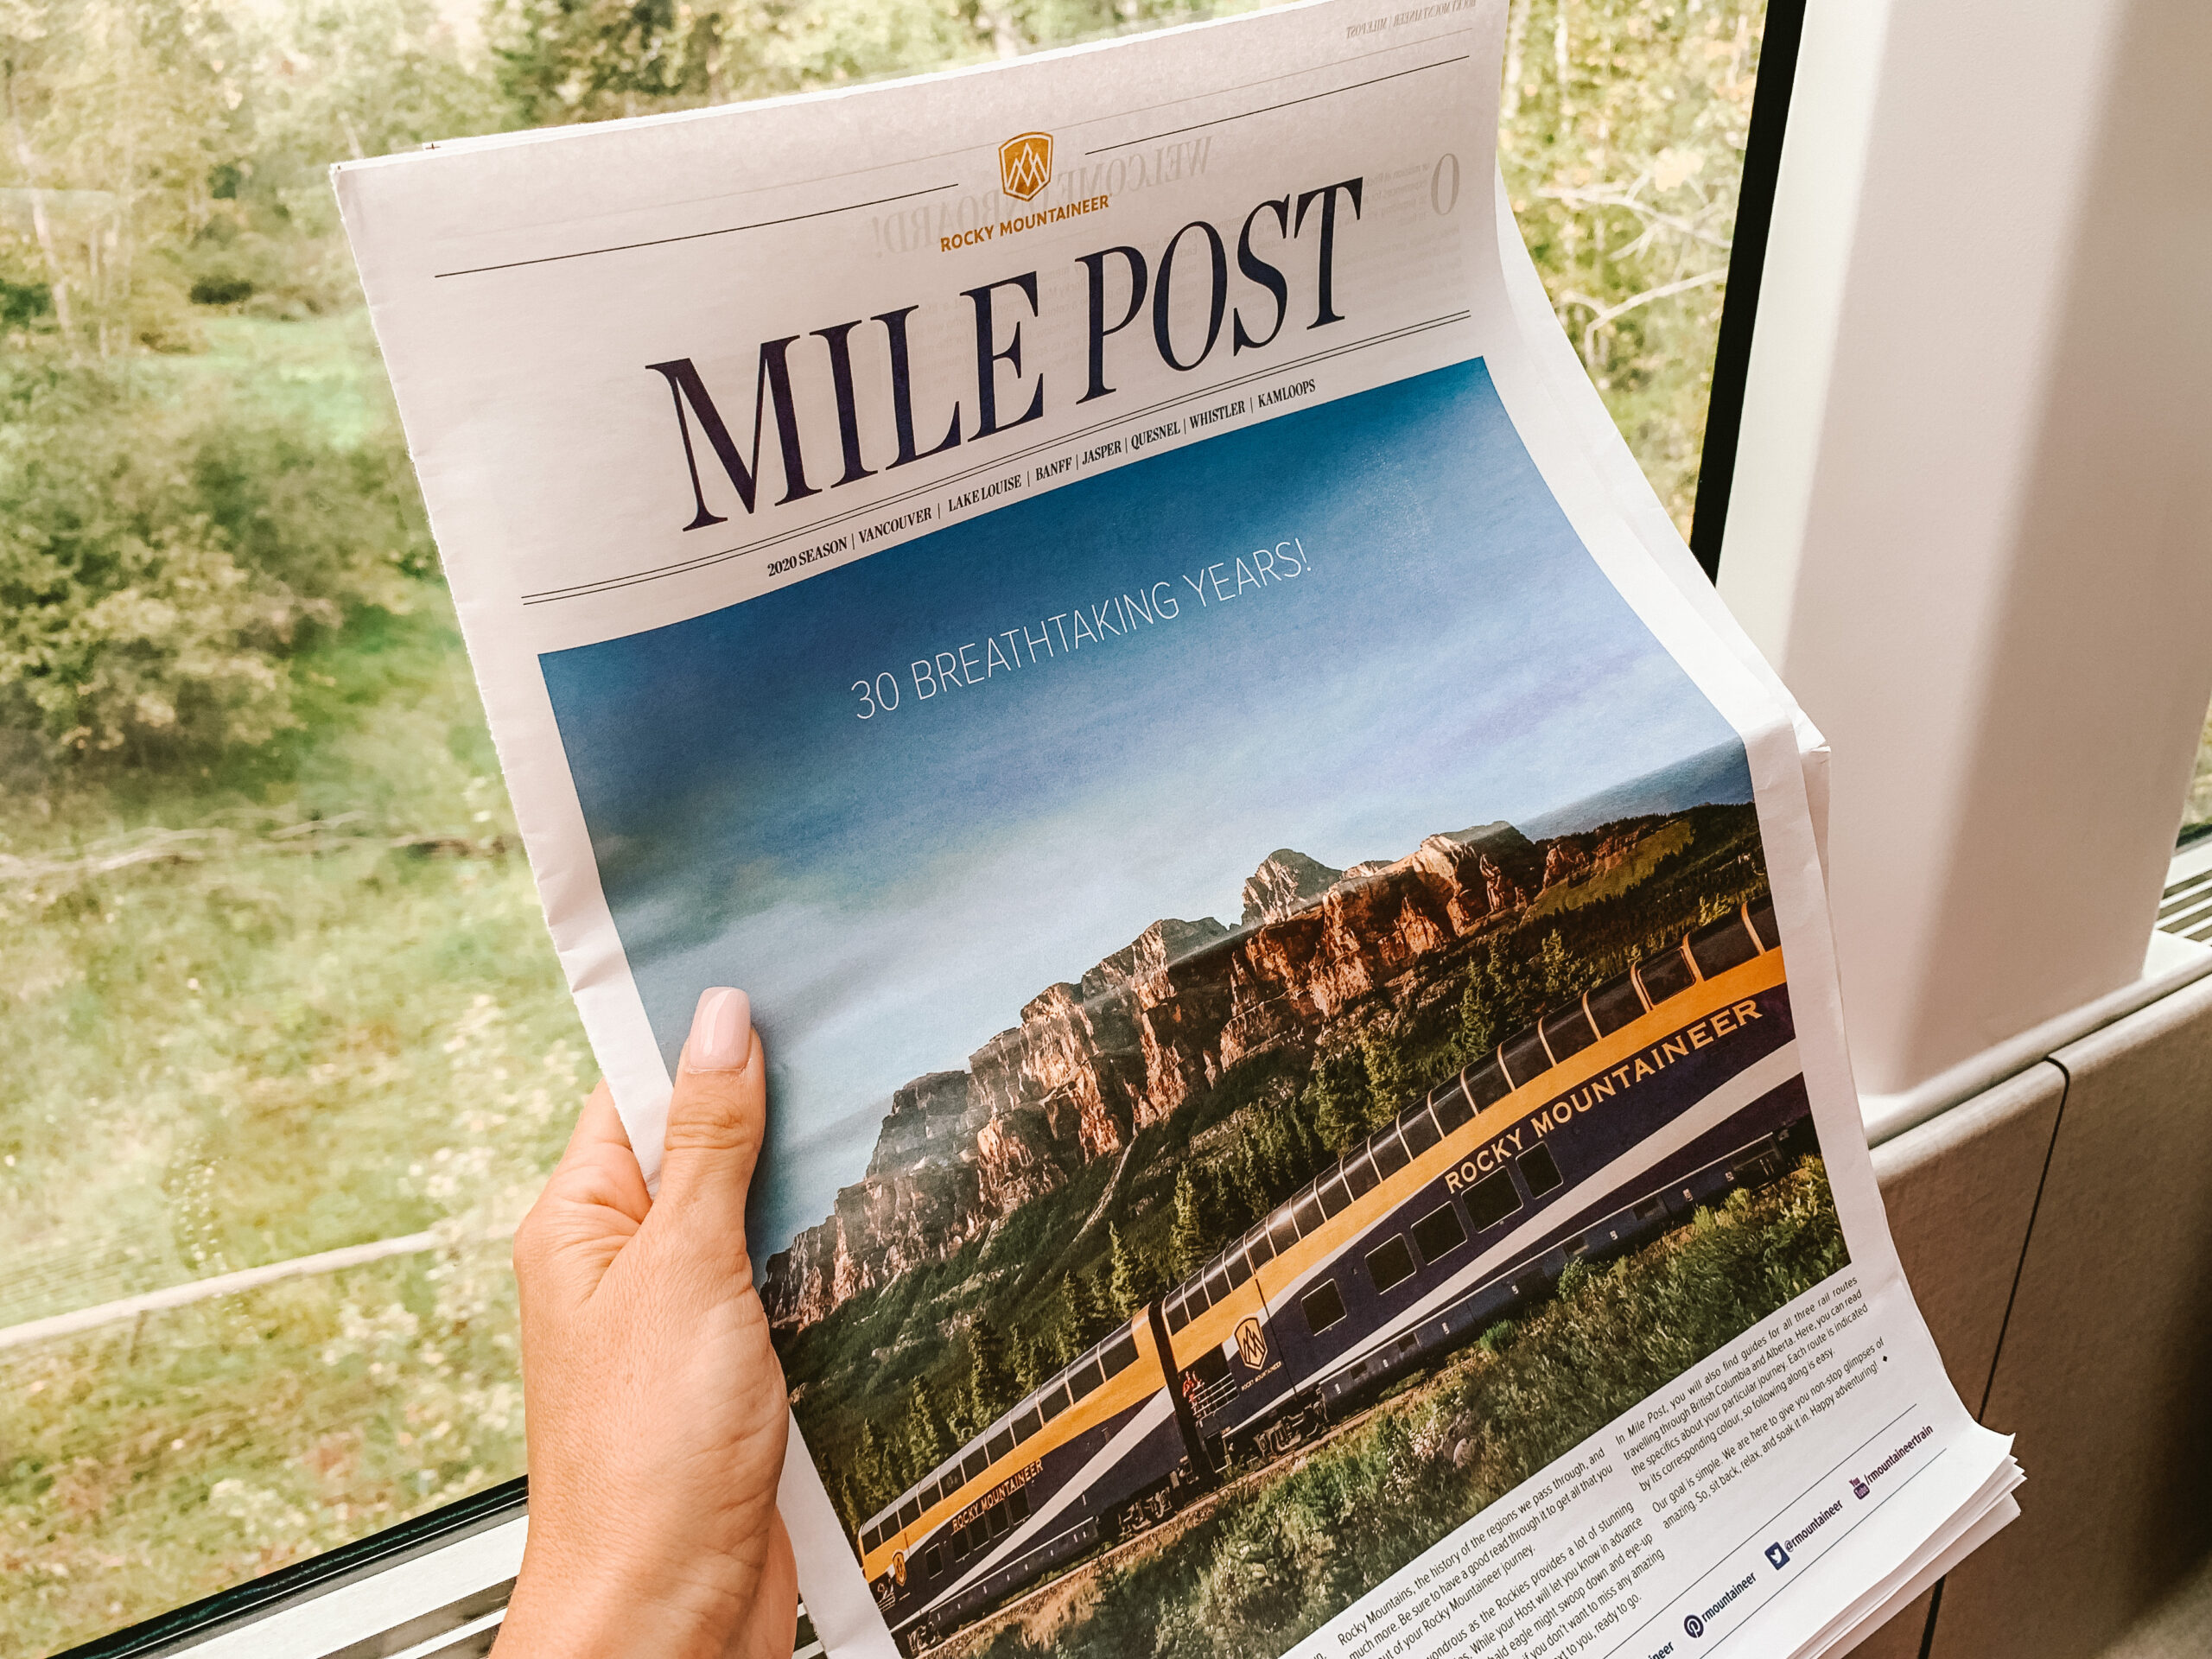 Rocky Mountaineer train newspaper the Mile Post